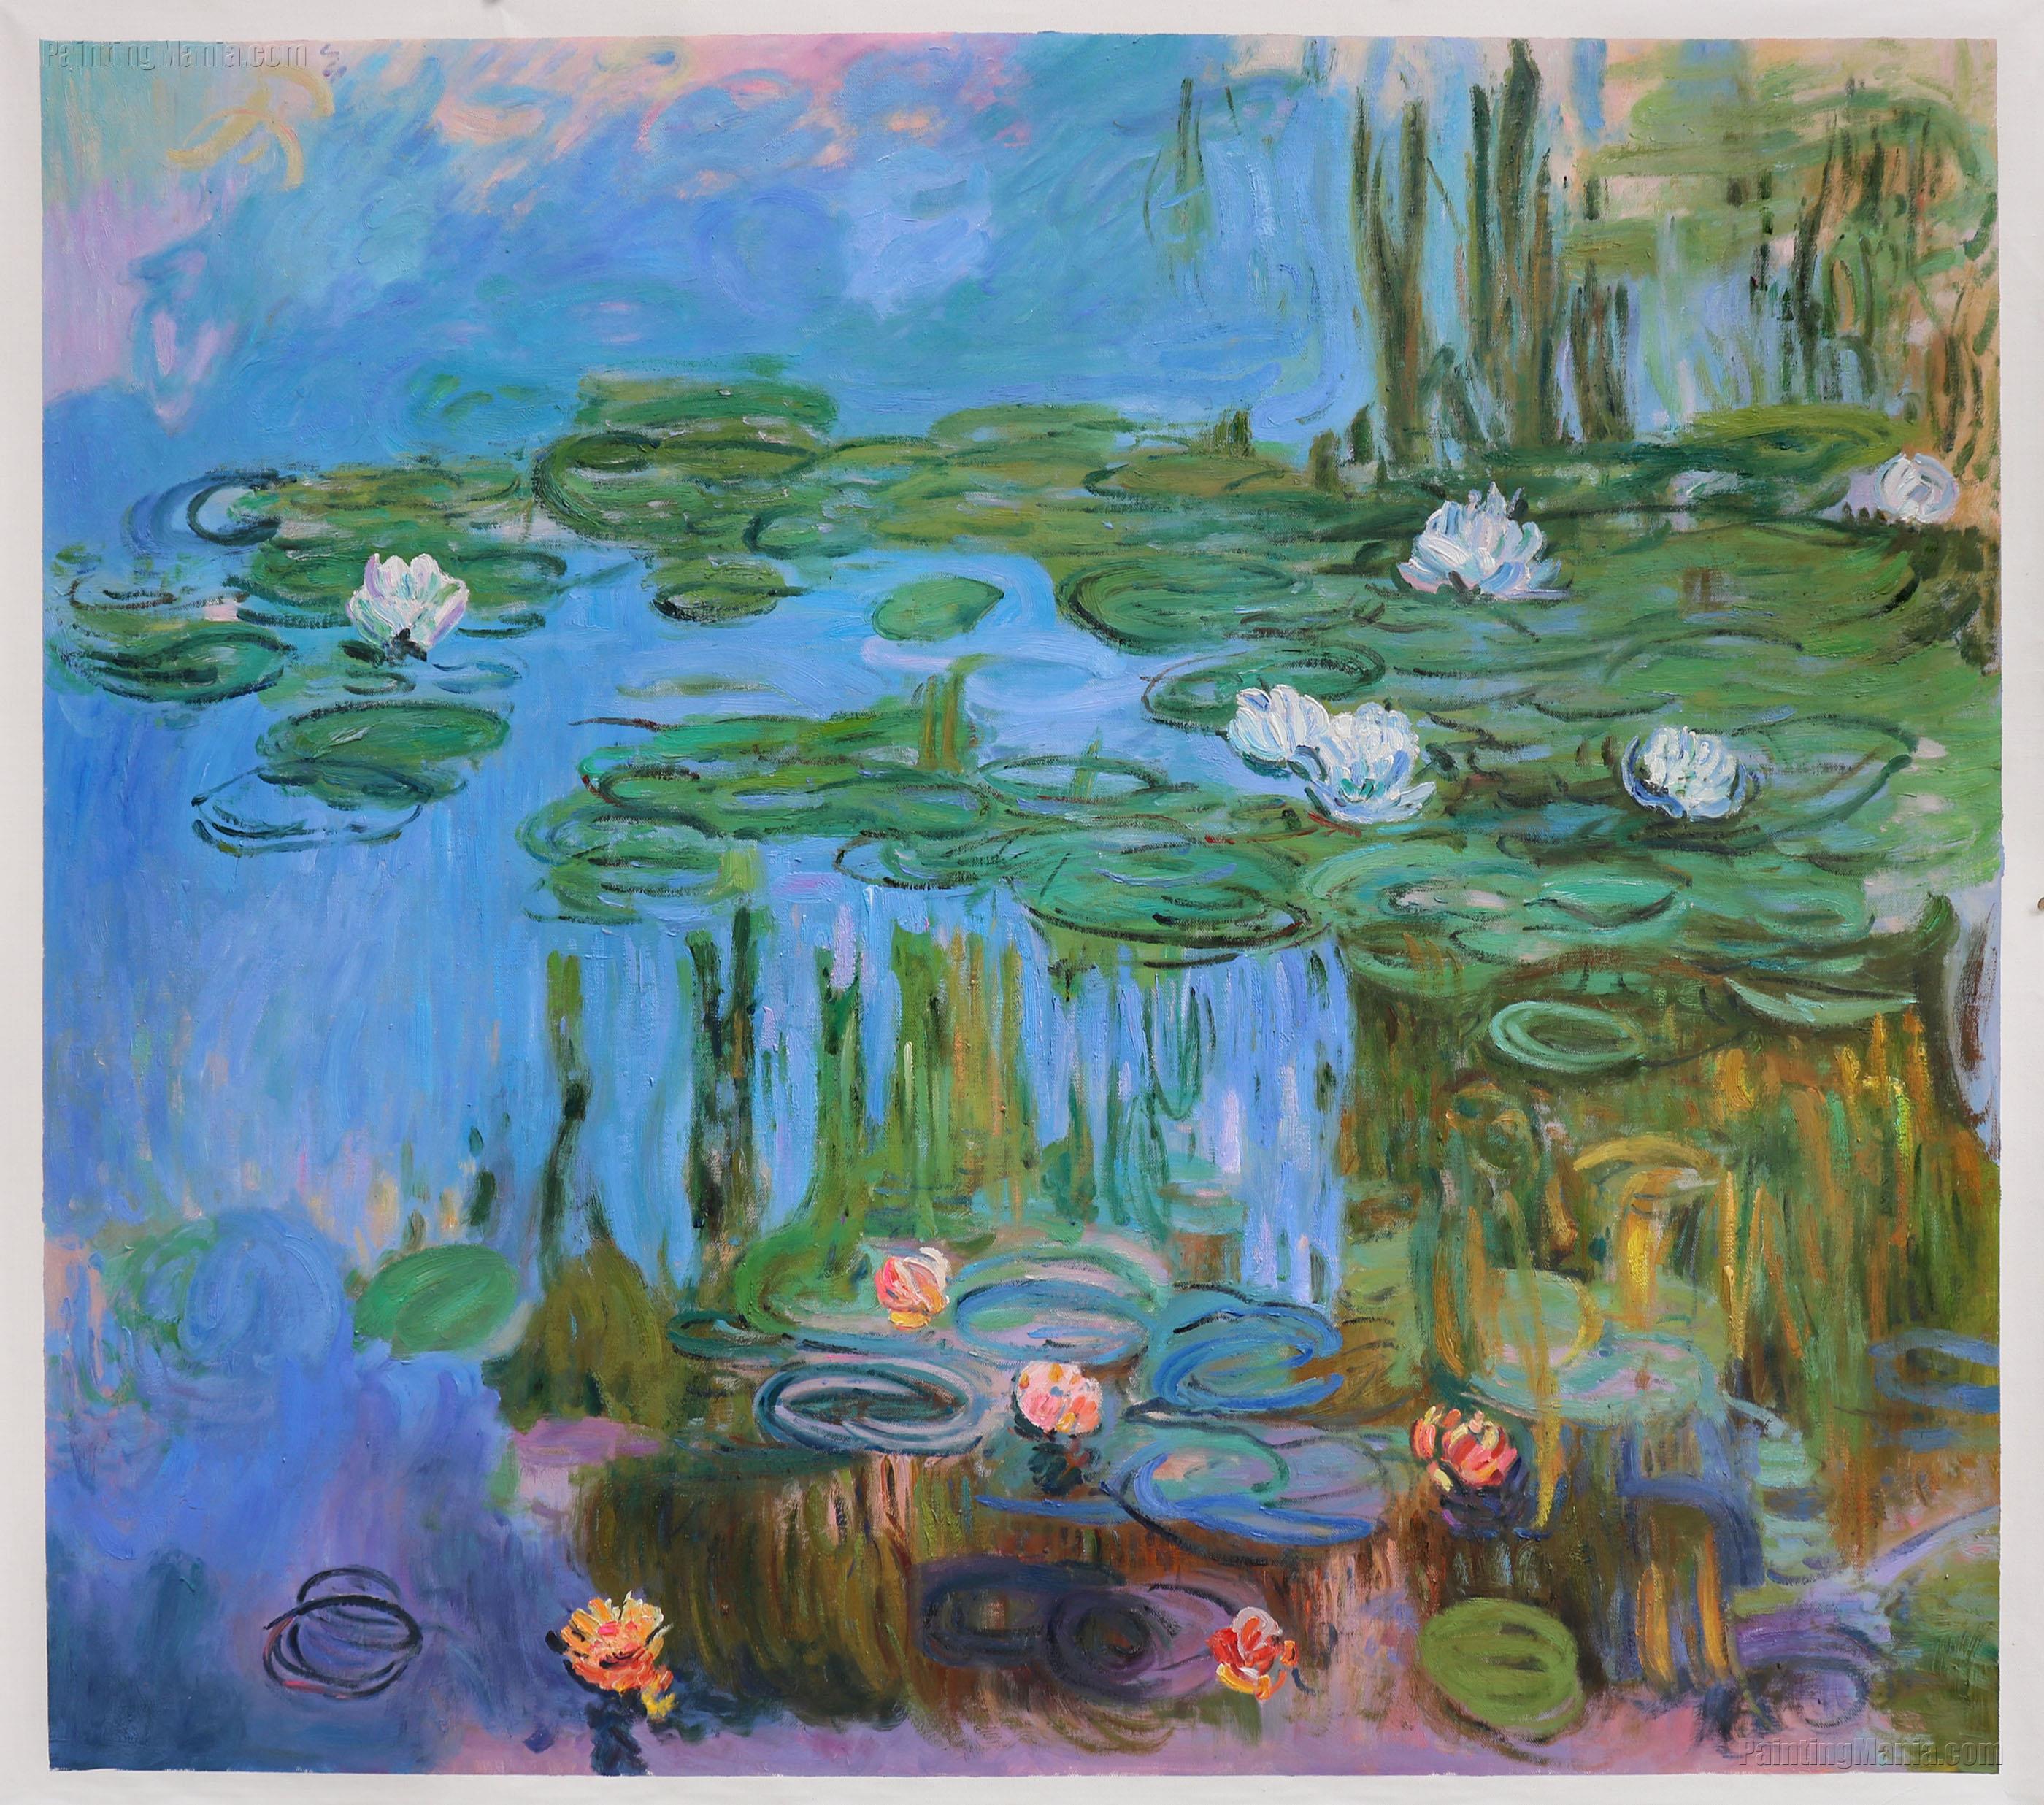 POND WITH WATER LILLIES LILLY PADS CLAUDE MONET PAINTING ART REAL CANVAS PRINT 